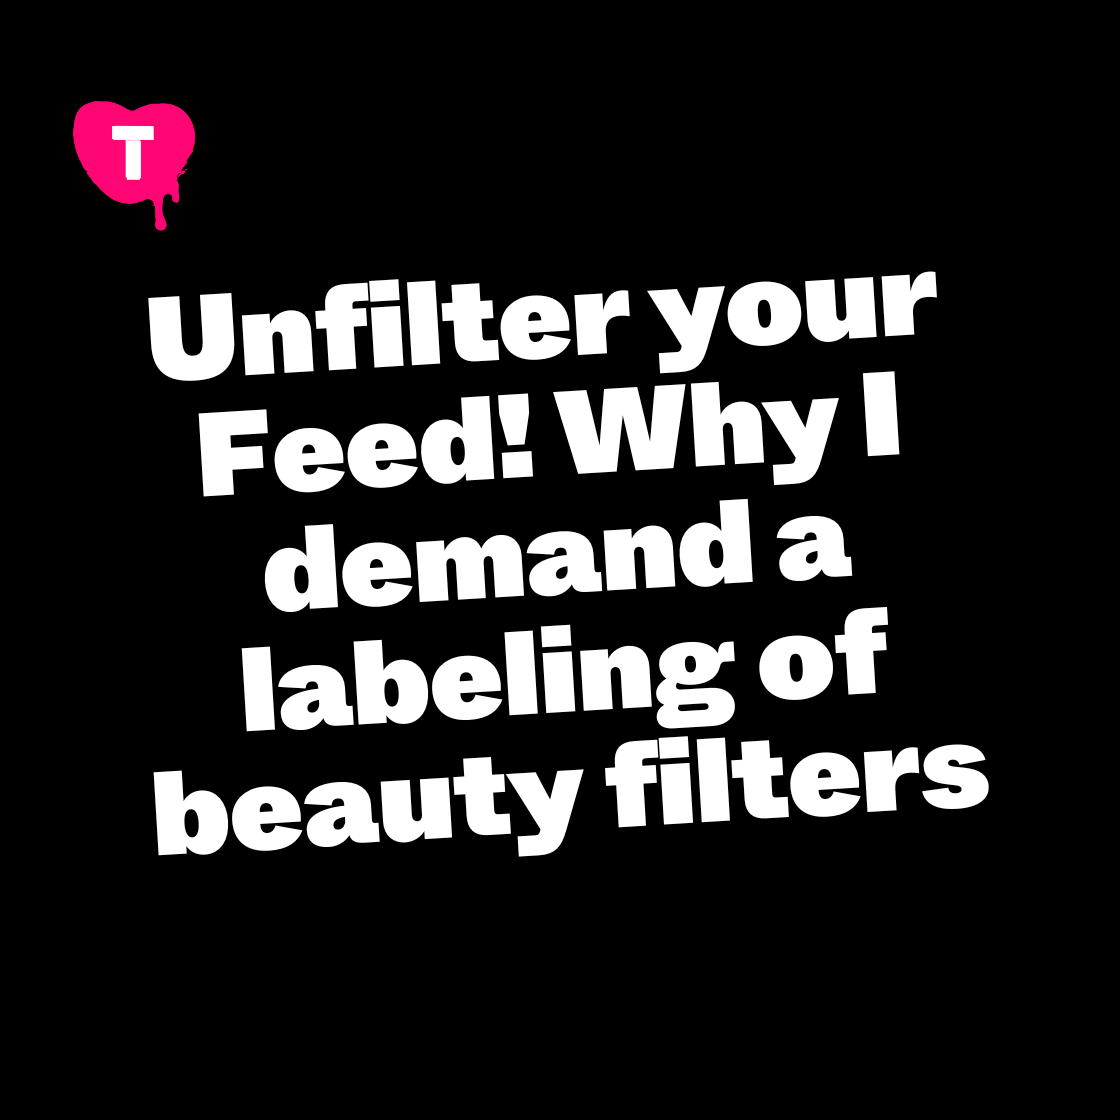 Unfilter your Feed!